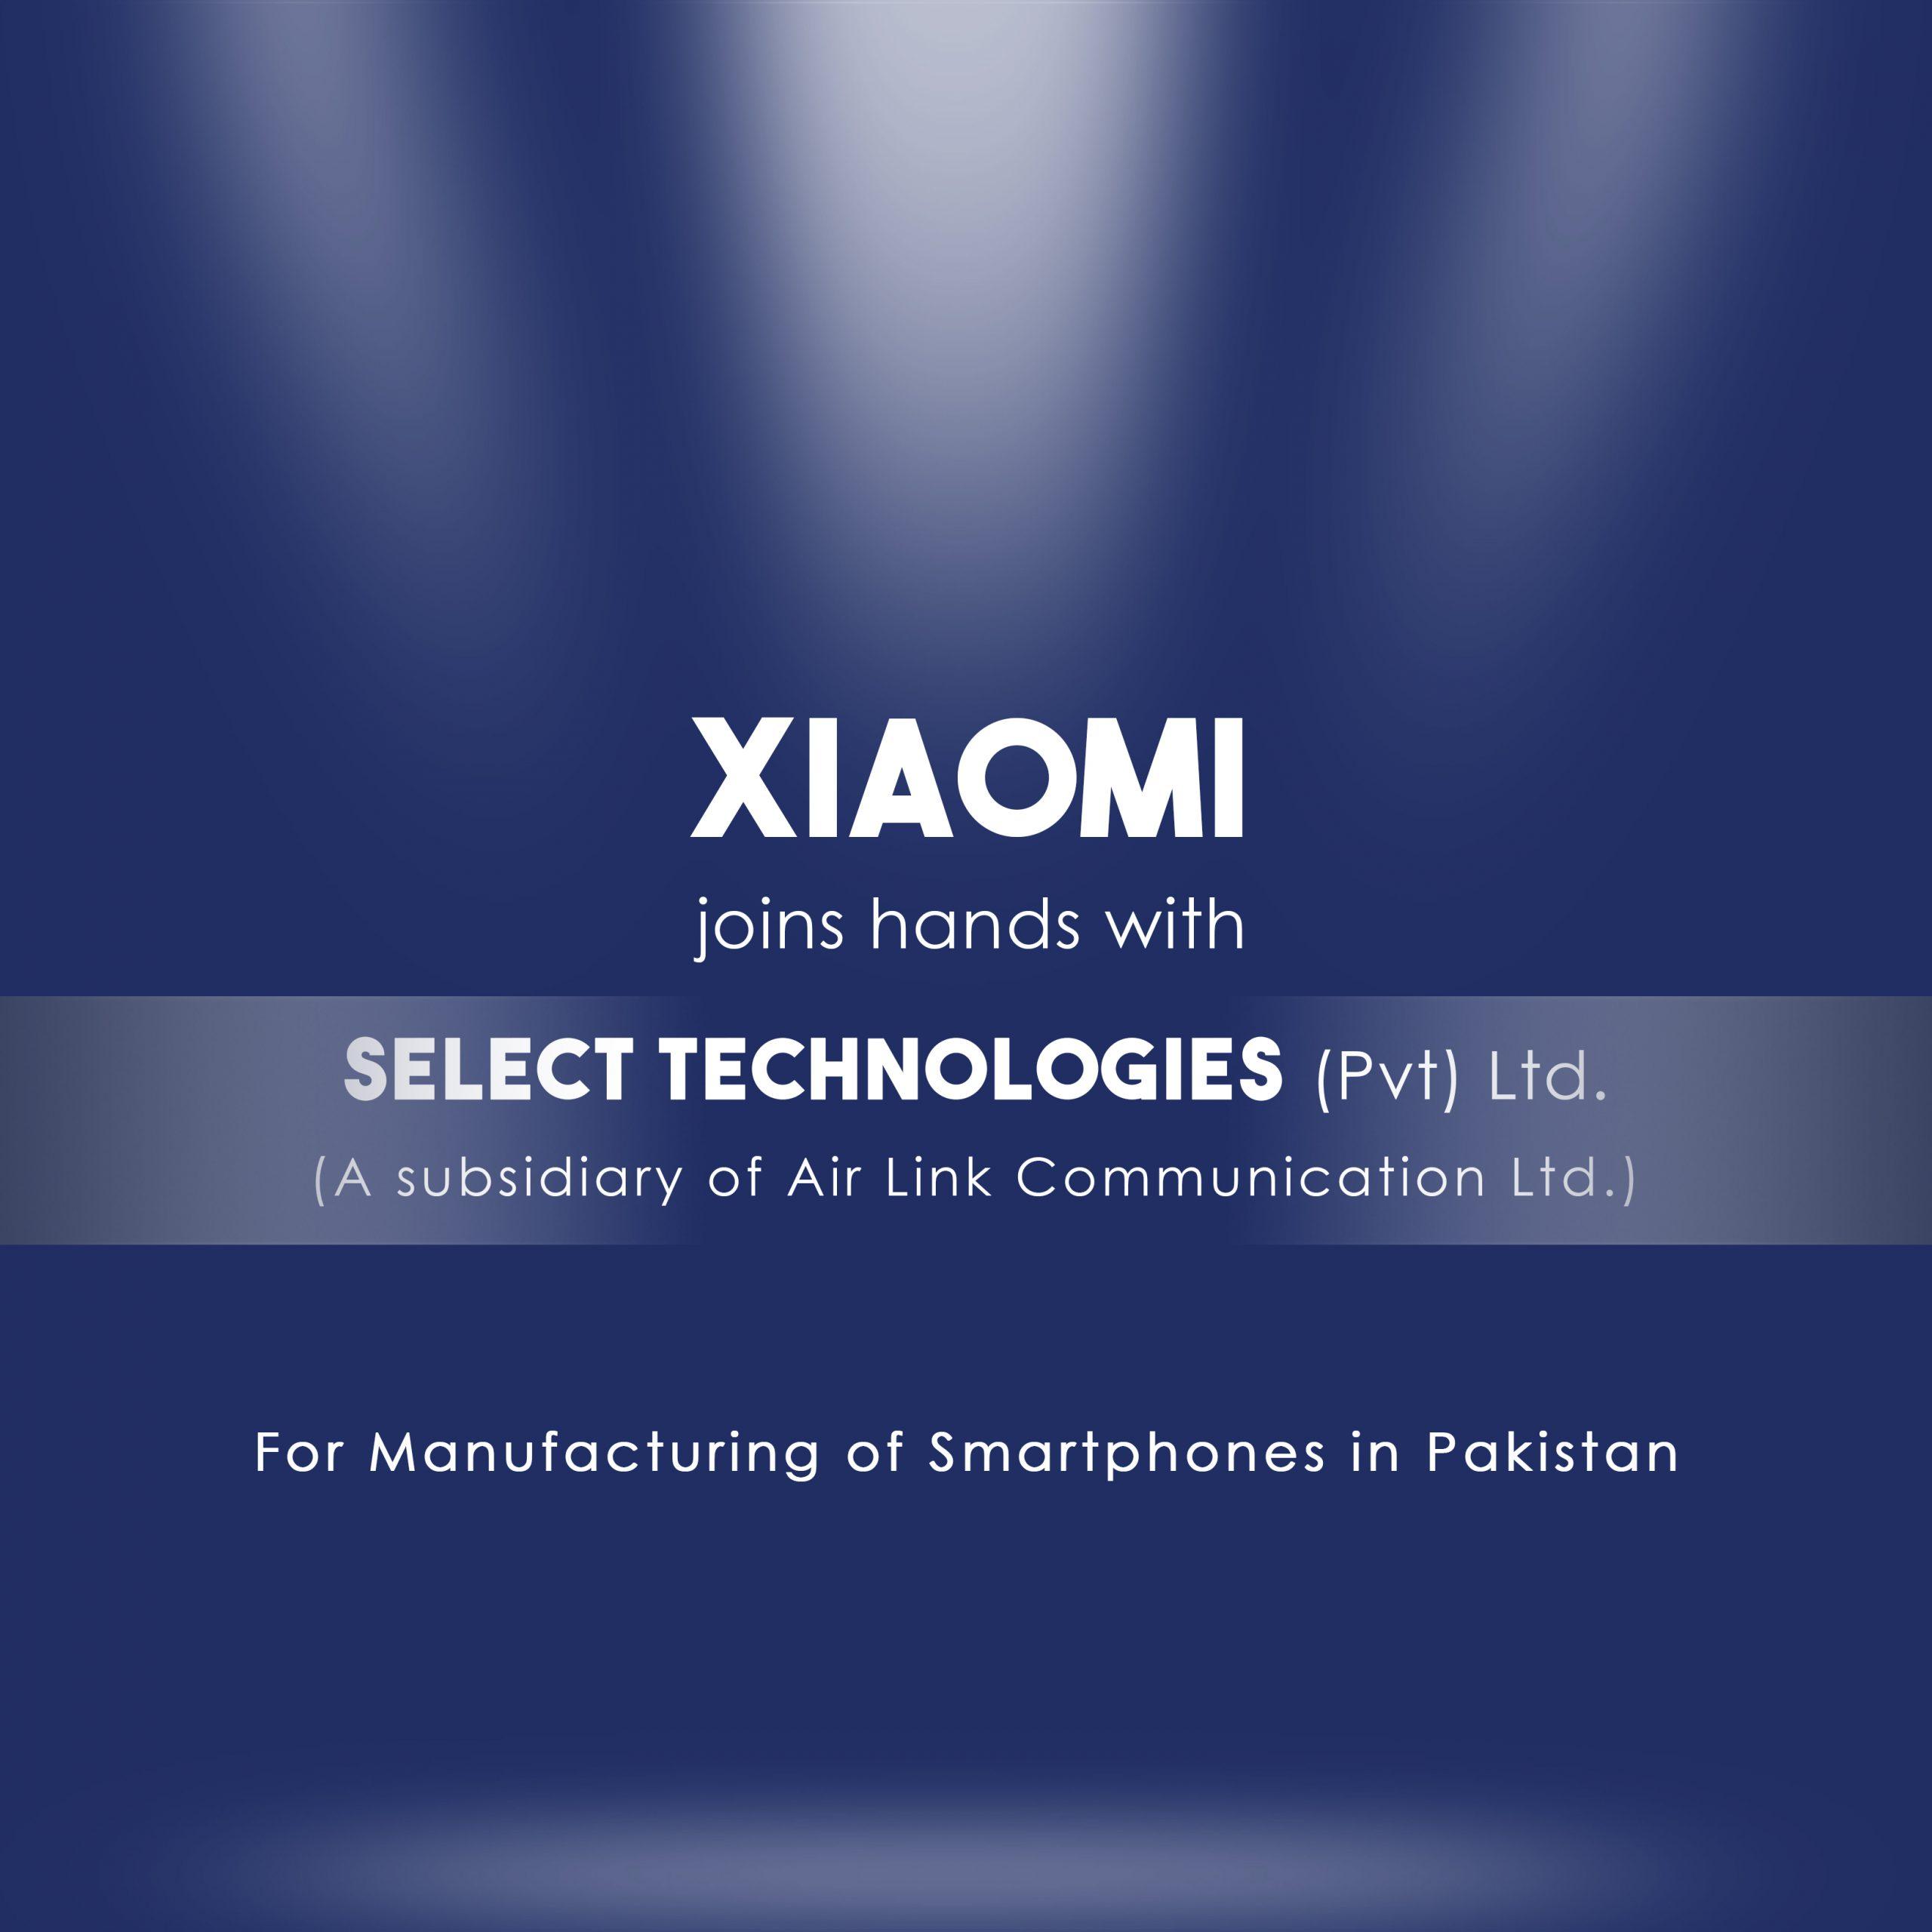 Manufacturing Business Partnership between Xiaomi and Select Technologies (Pvt) Limited